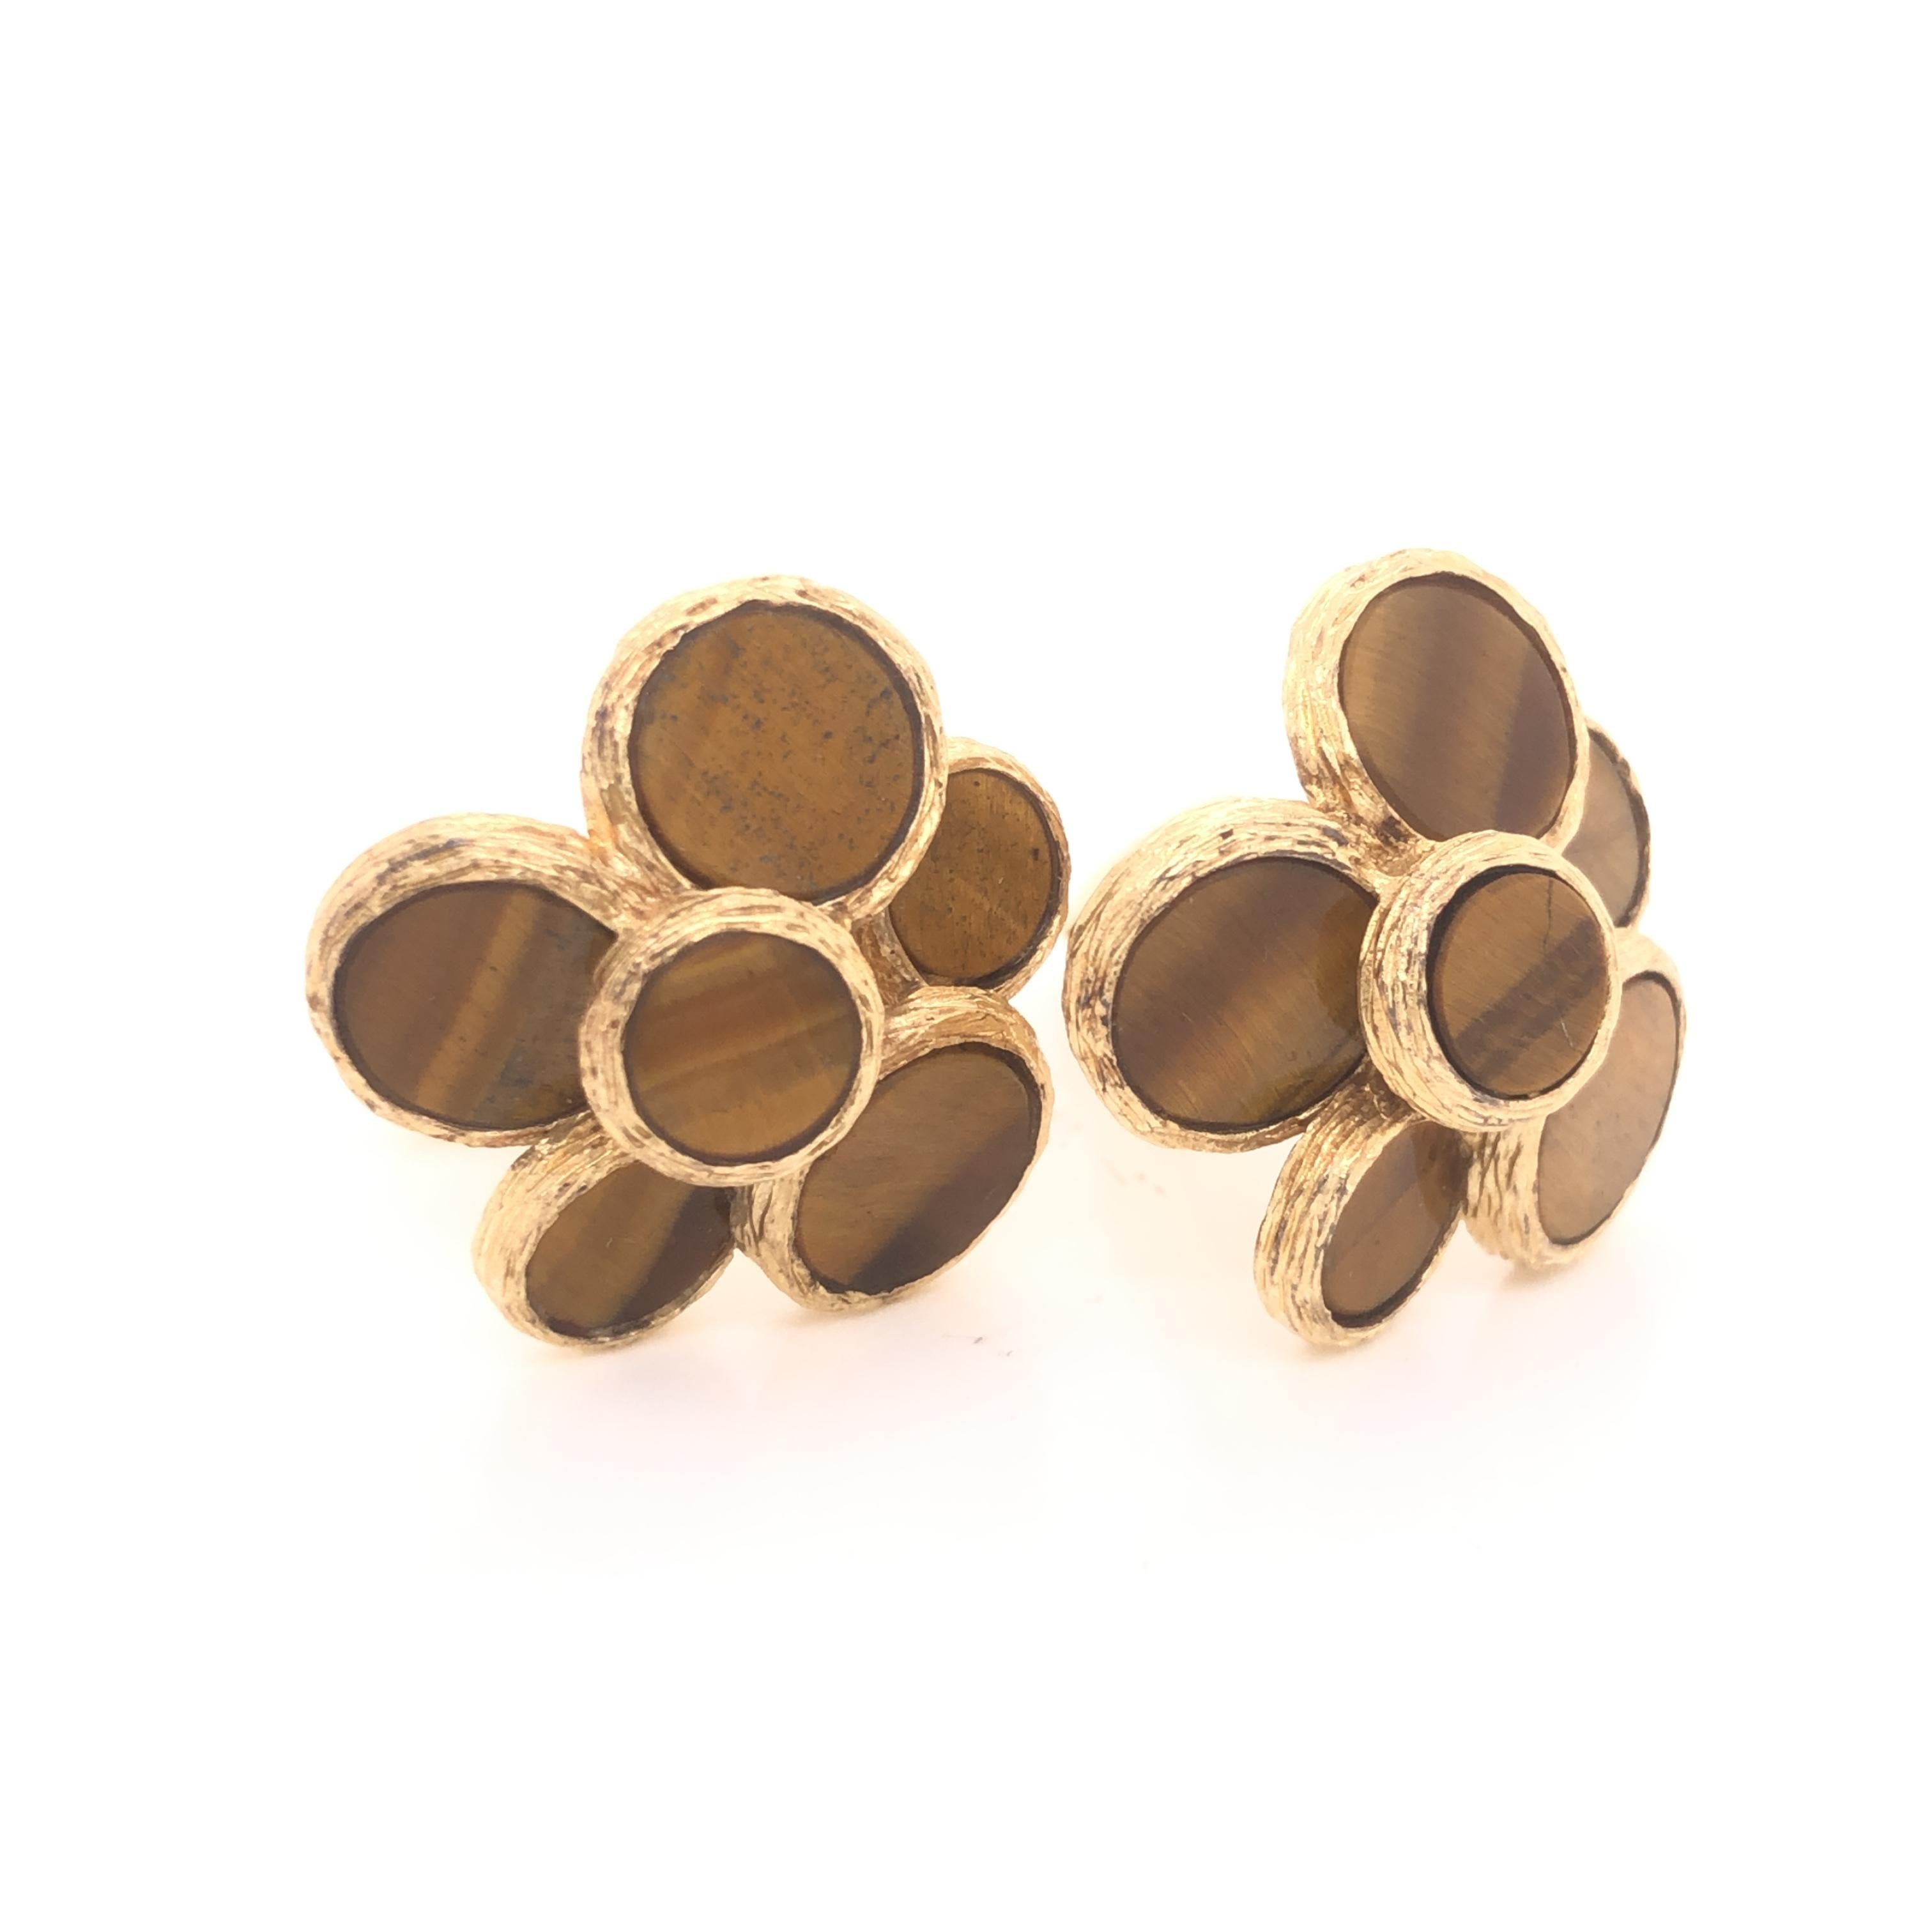 Amazing design from famed designer Aletto Brothers. This pair of cufflinks is crafted in 14k yellow gold. The pair is highlighted with beautiful tigers eye gemstones that are bezel set in a cluster pattern. The gemstones are set on different levels